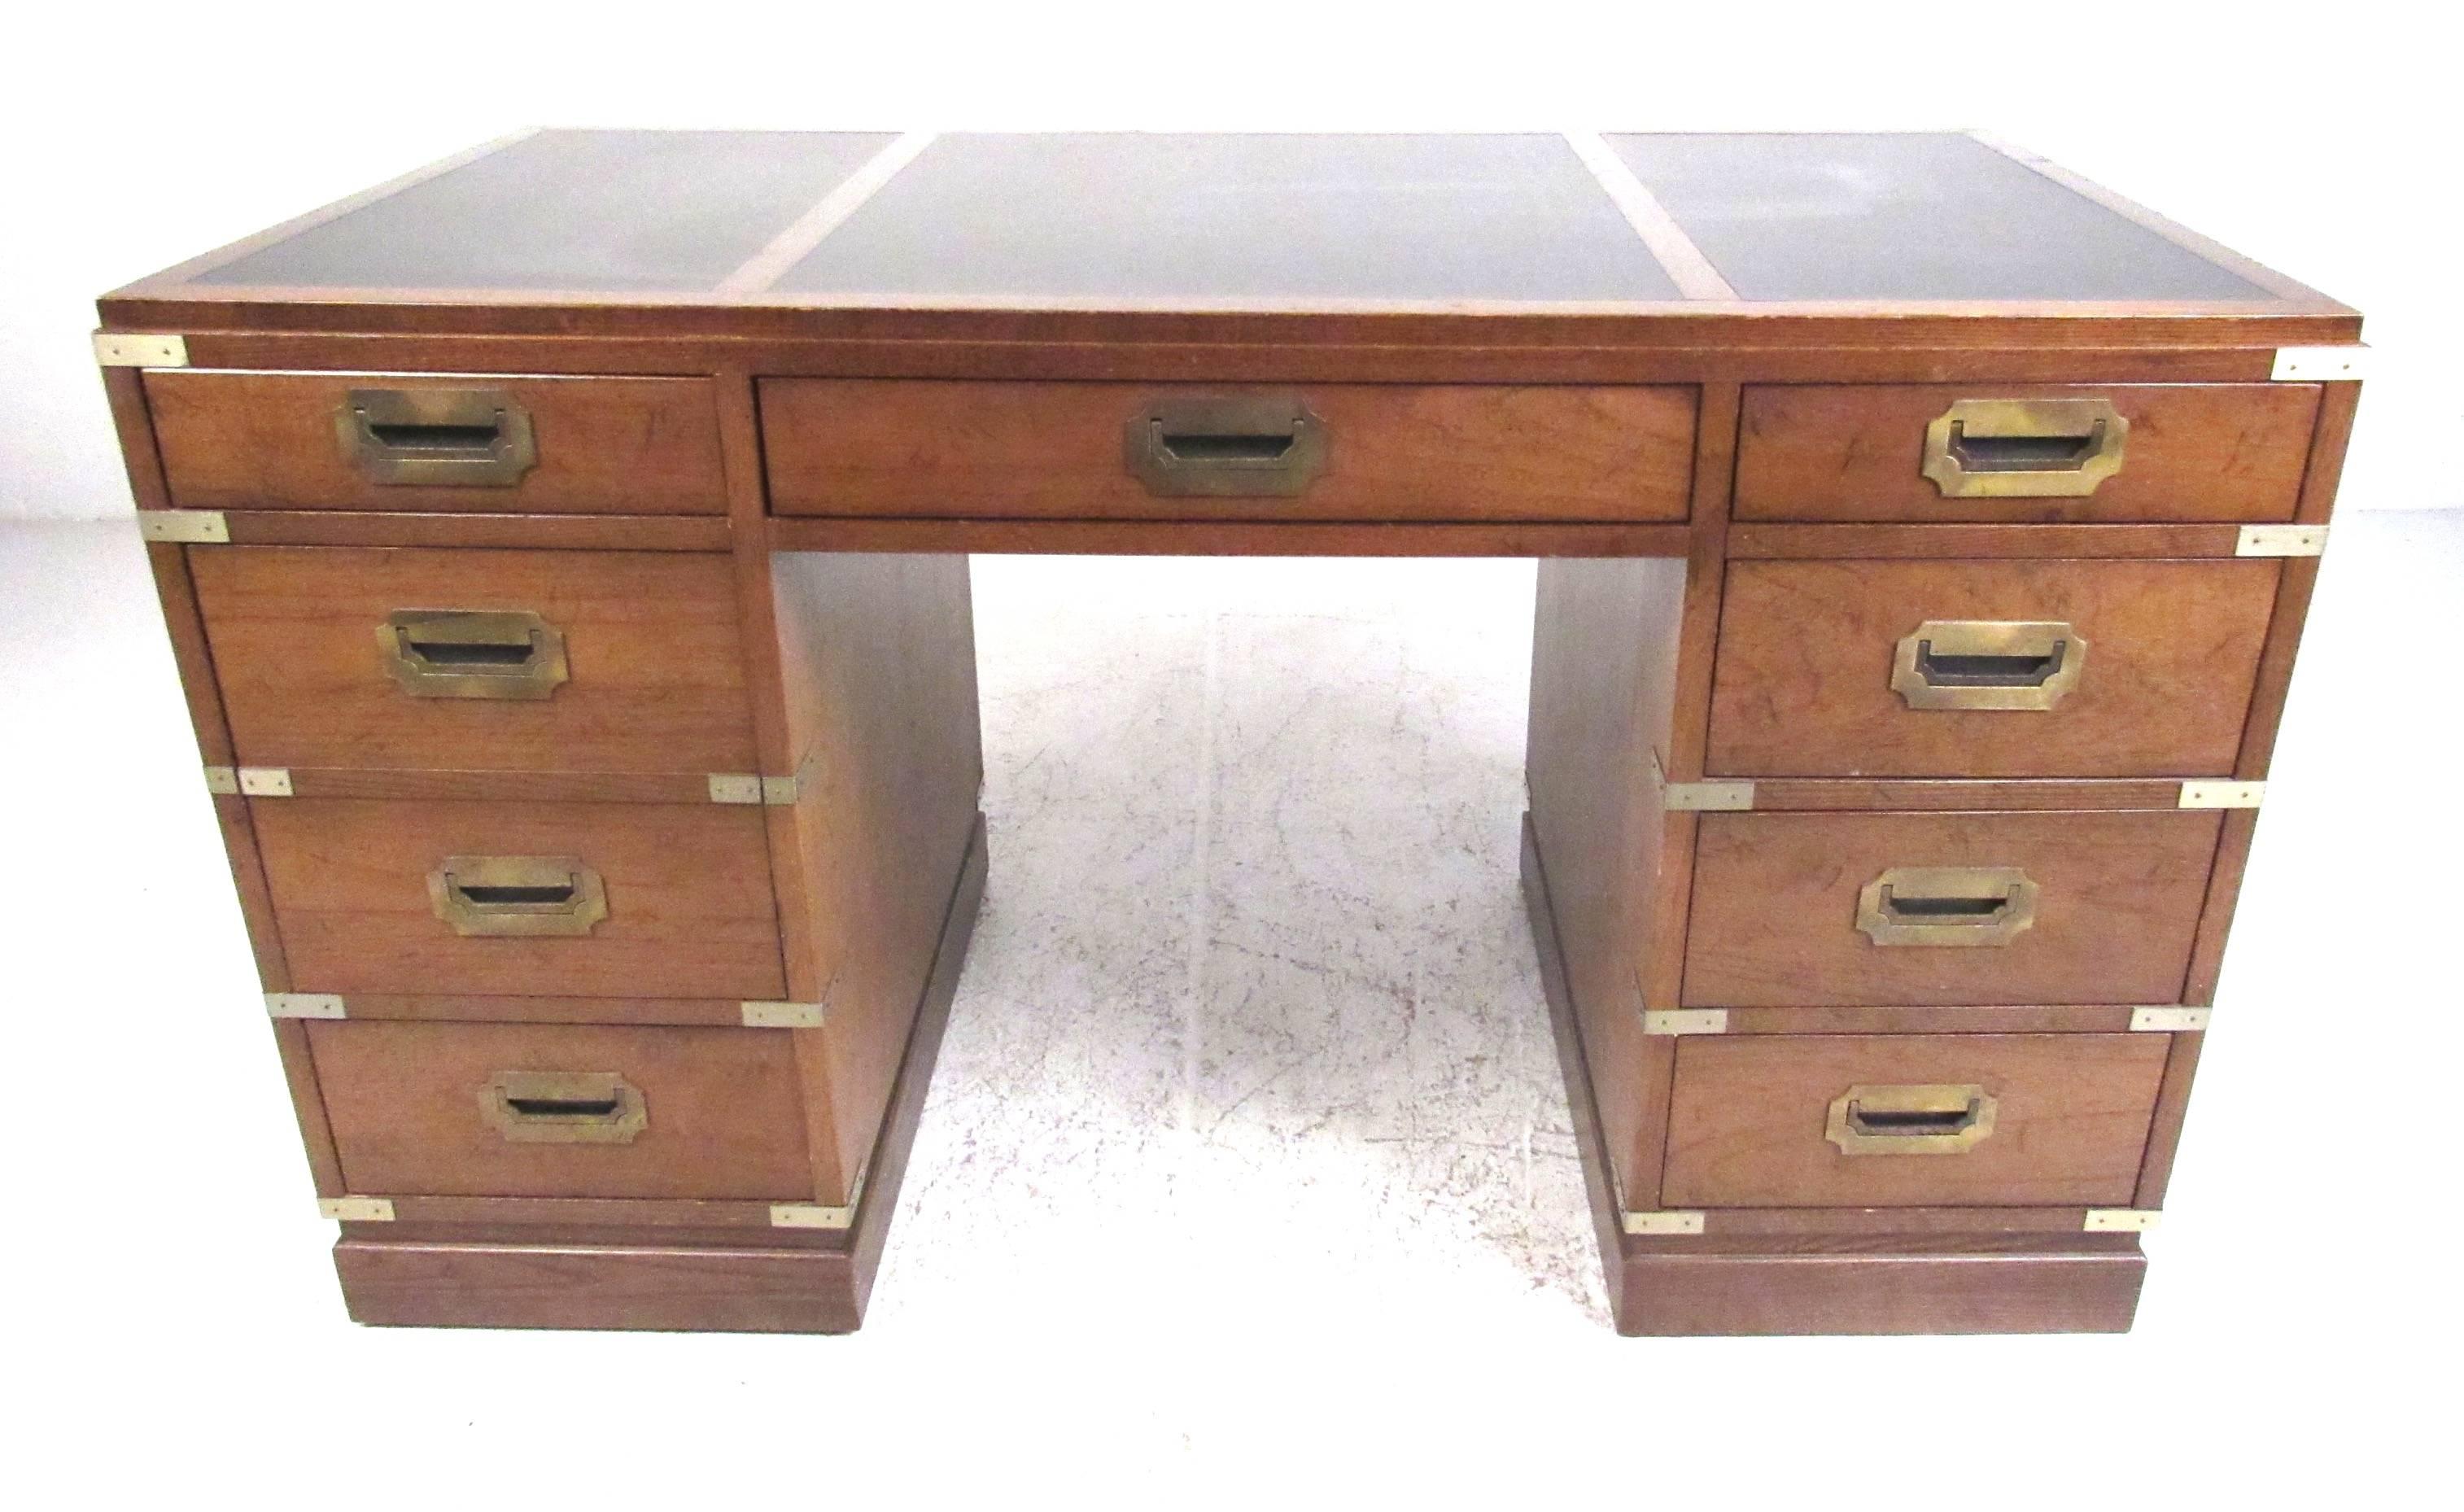 This campaign desk is a comfortable size to fit in various settings. Brass bound corners and pulls contrast nicely with the oak finish, and black top. Branded by Sligh of Holland/Grand Rapids, Michigan. Please confirm item location (NY or NJ). 